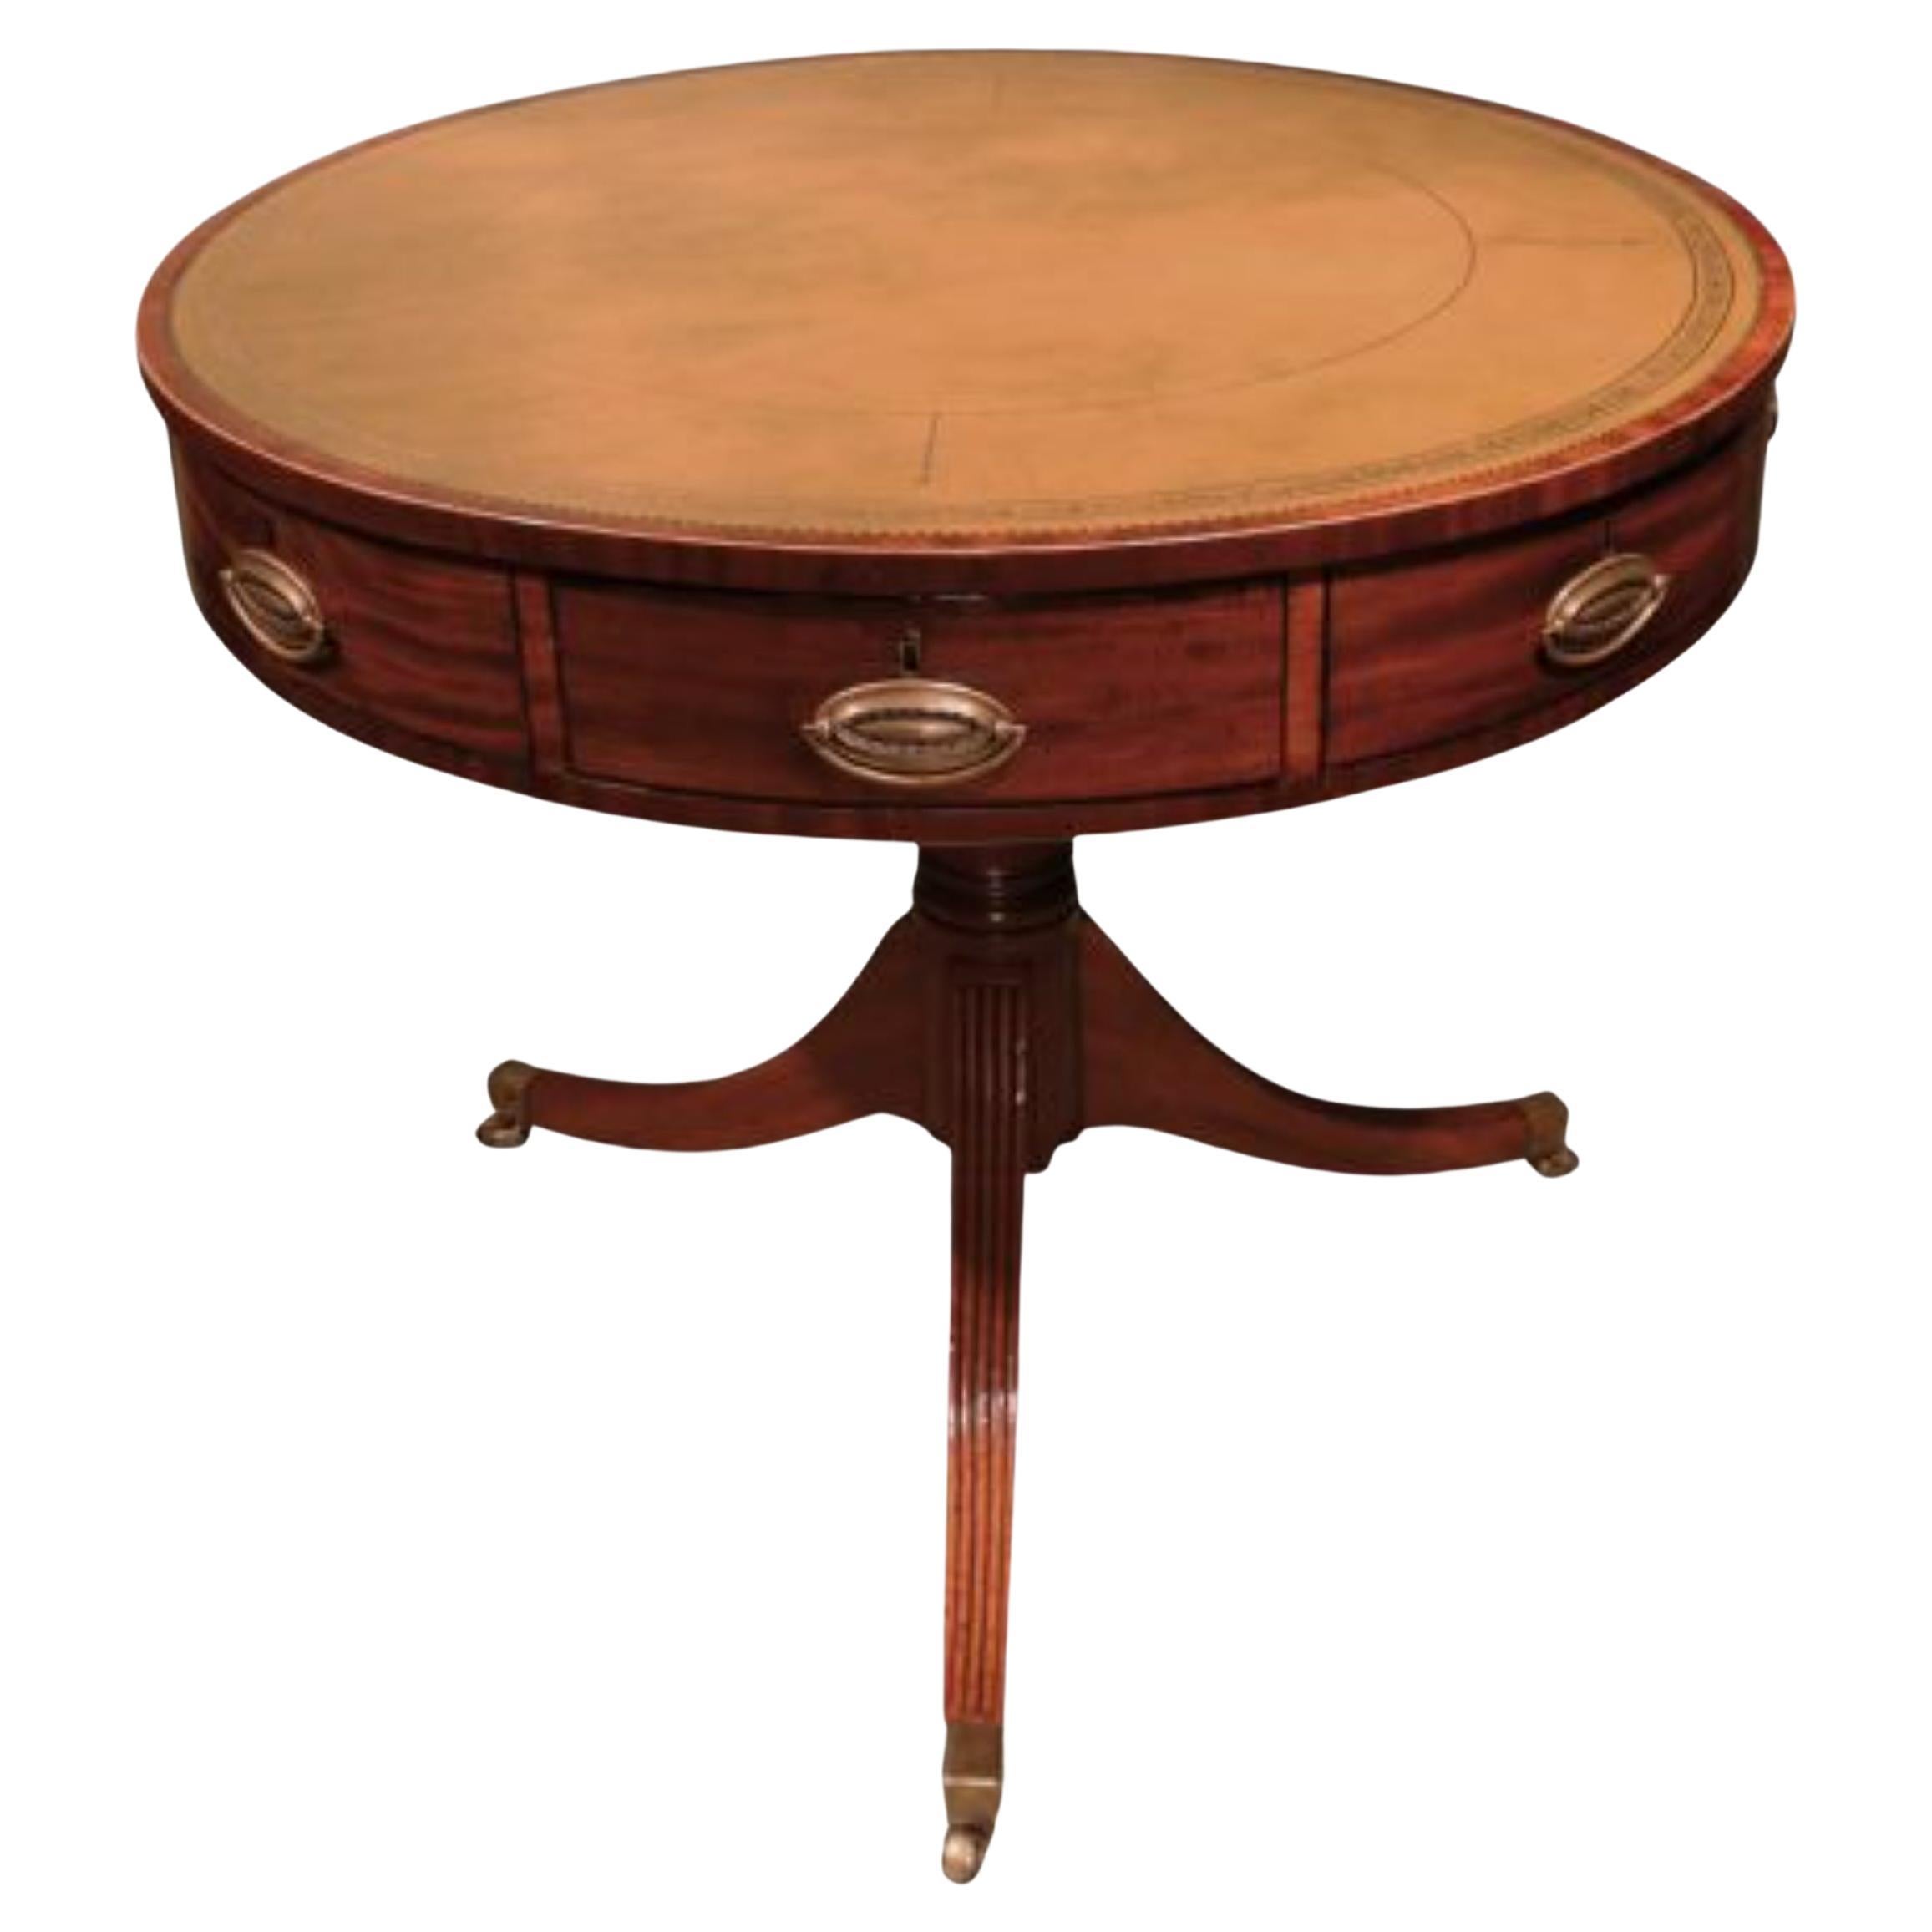 George III Period Small Mahogany Drum Table